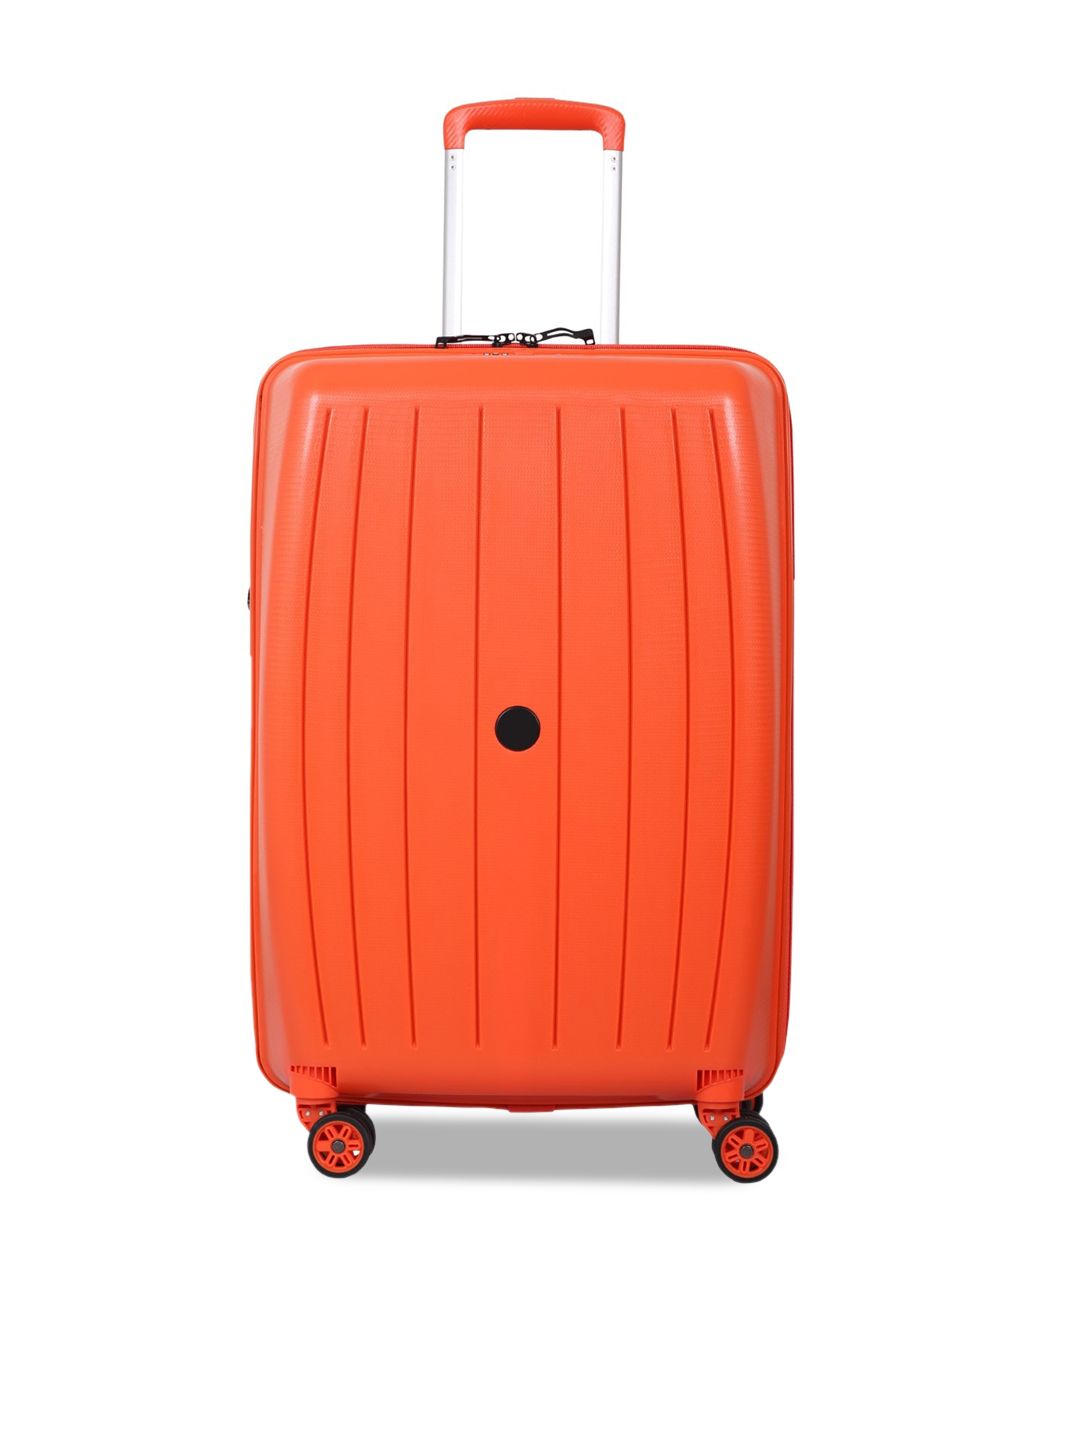 Polo Class Orange Solid Cabin-Size Trolley Bag Price in India